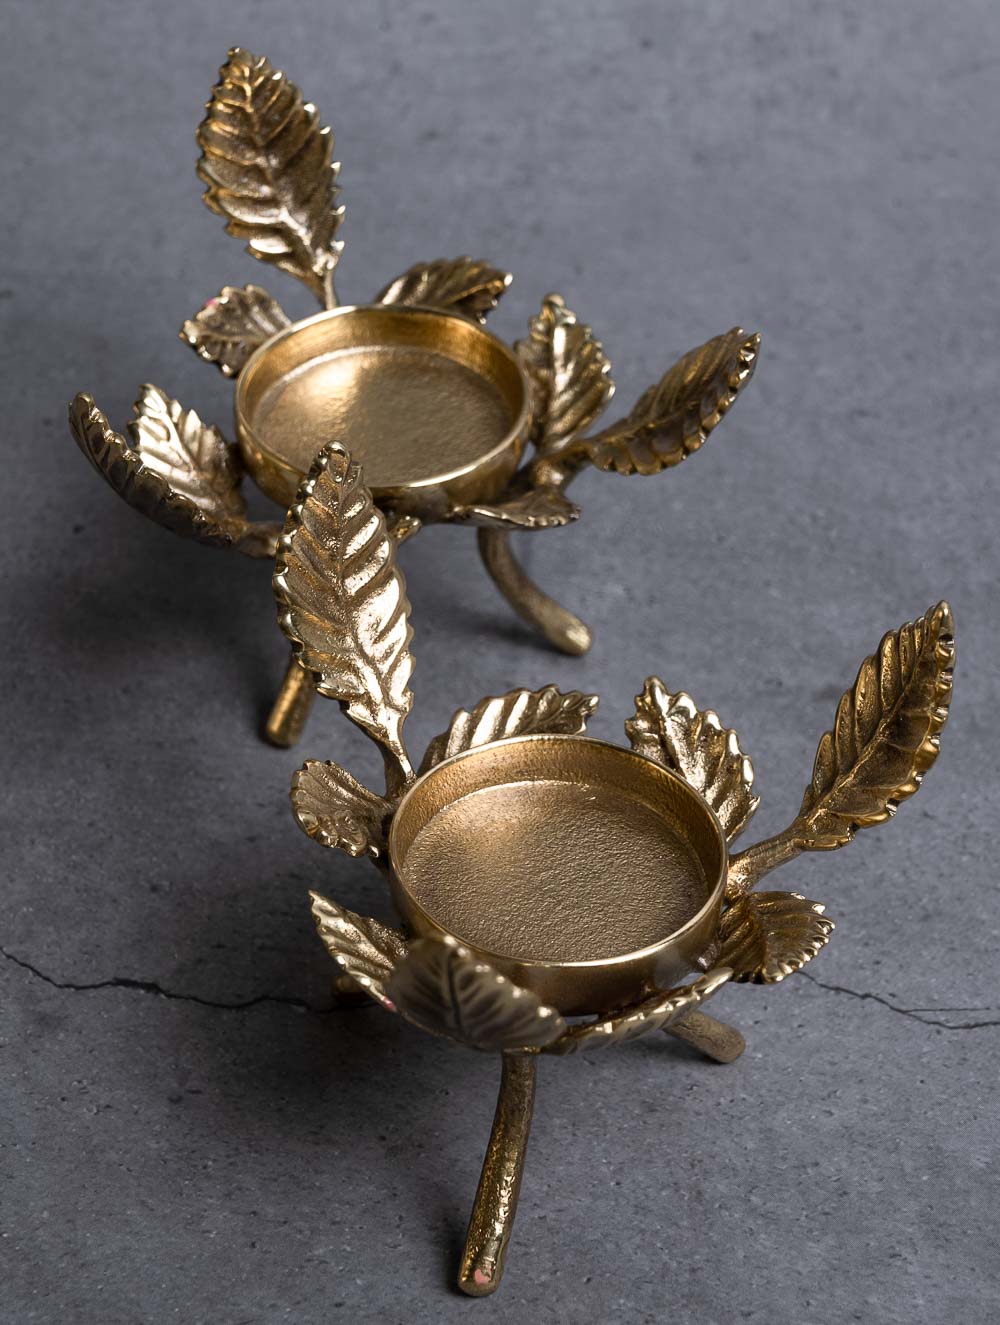 Load image into Gallery viewer, Exclusive Brass Tealight Holders (Set of 2) - Rose Leaves